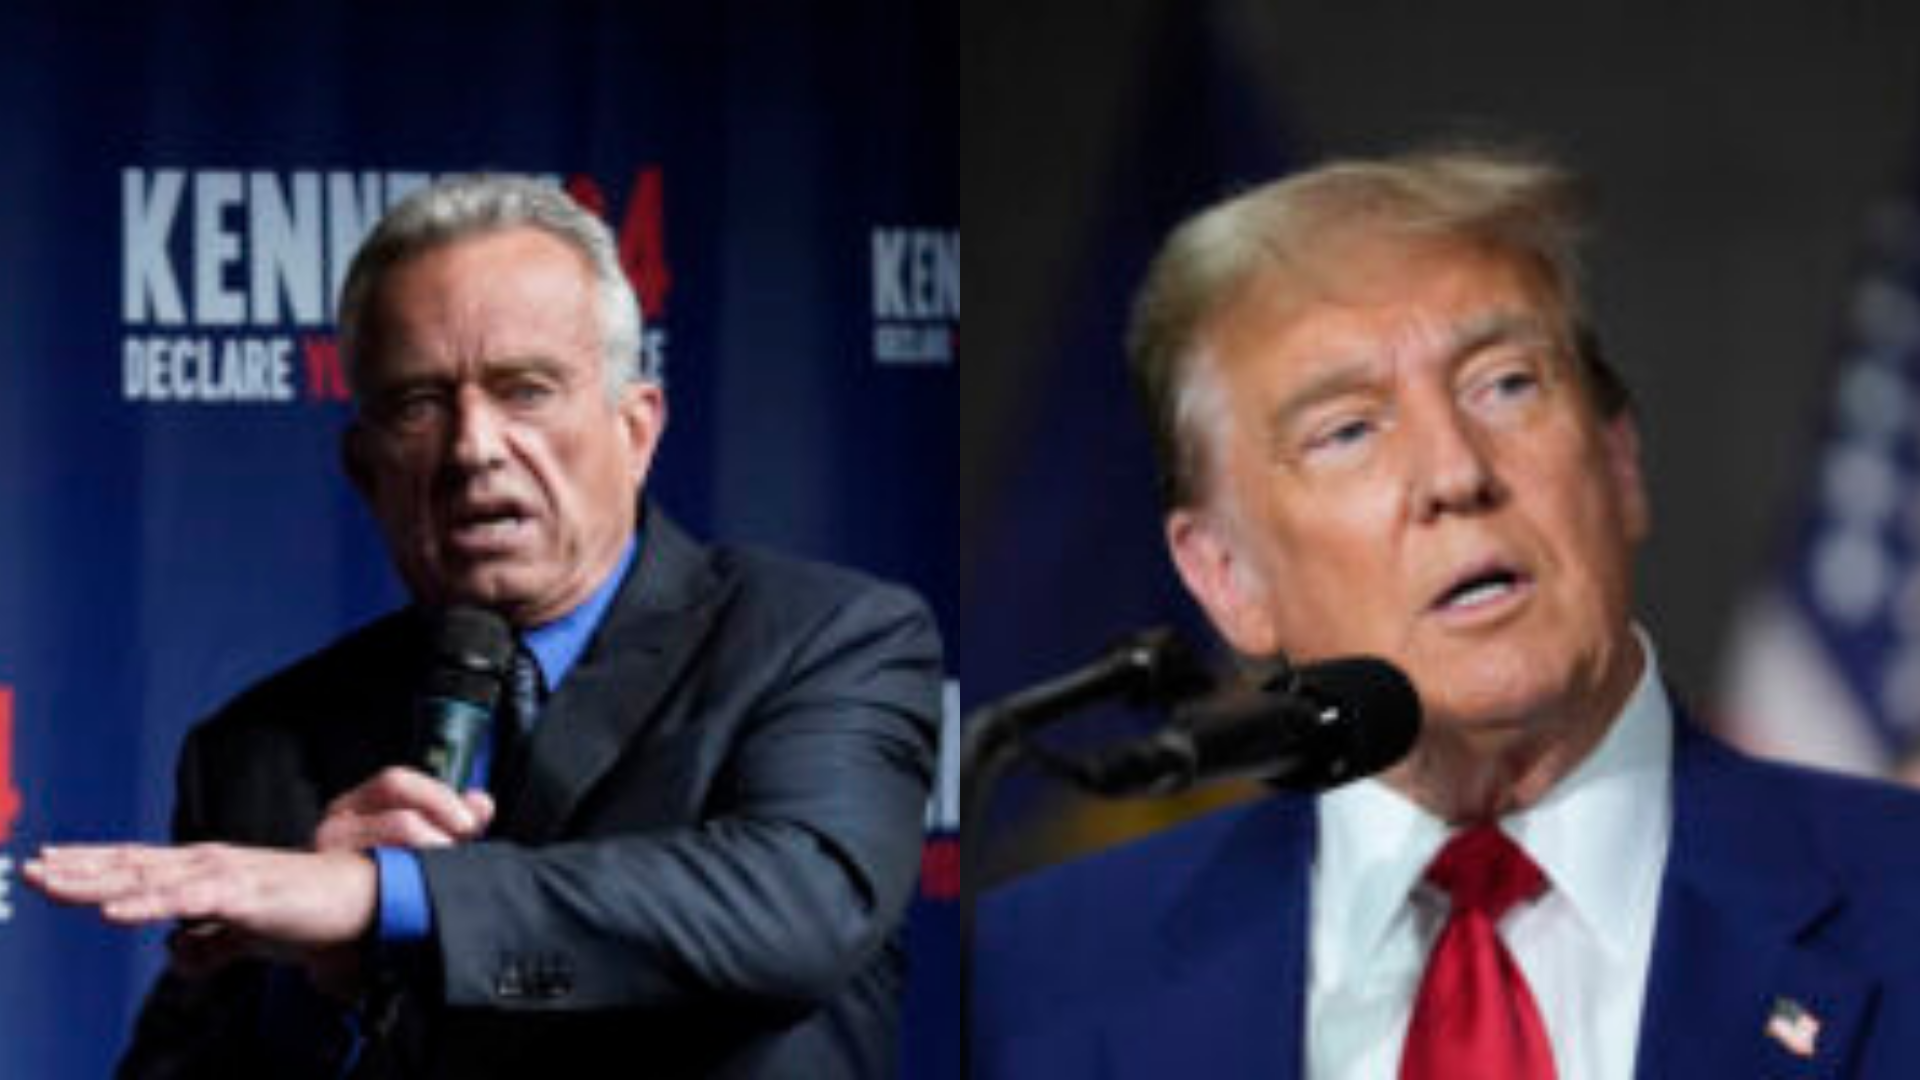 Trump Smokes Bill Maher and RFK Jr. for ‘Really Boring’ Interview, Tries to Paint RFK as a ‘Radical Left Lunatic’